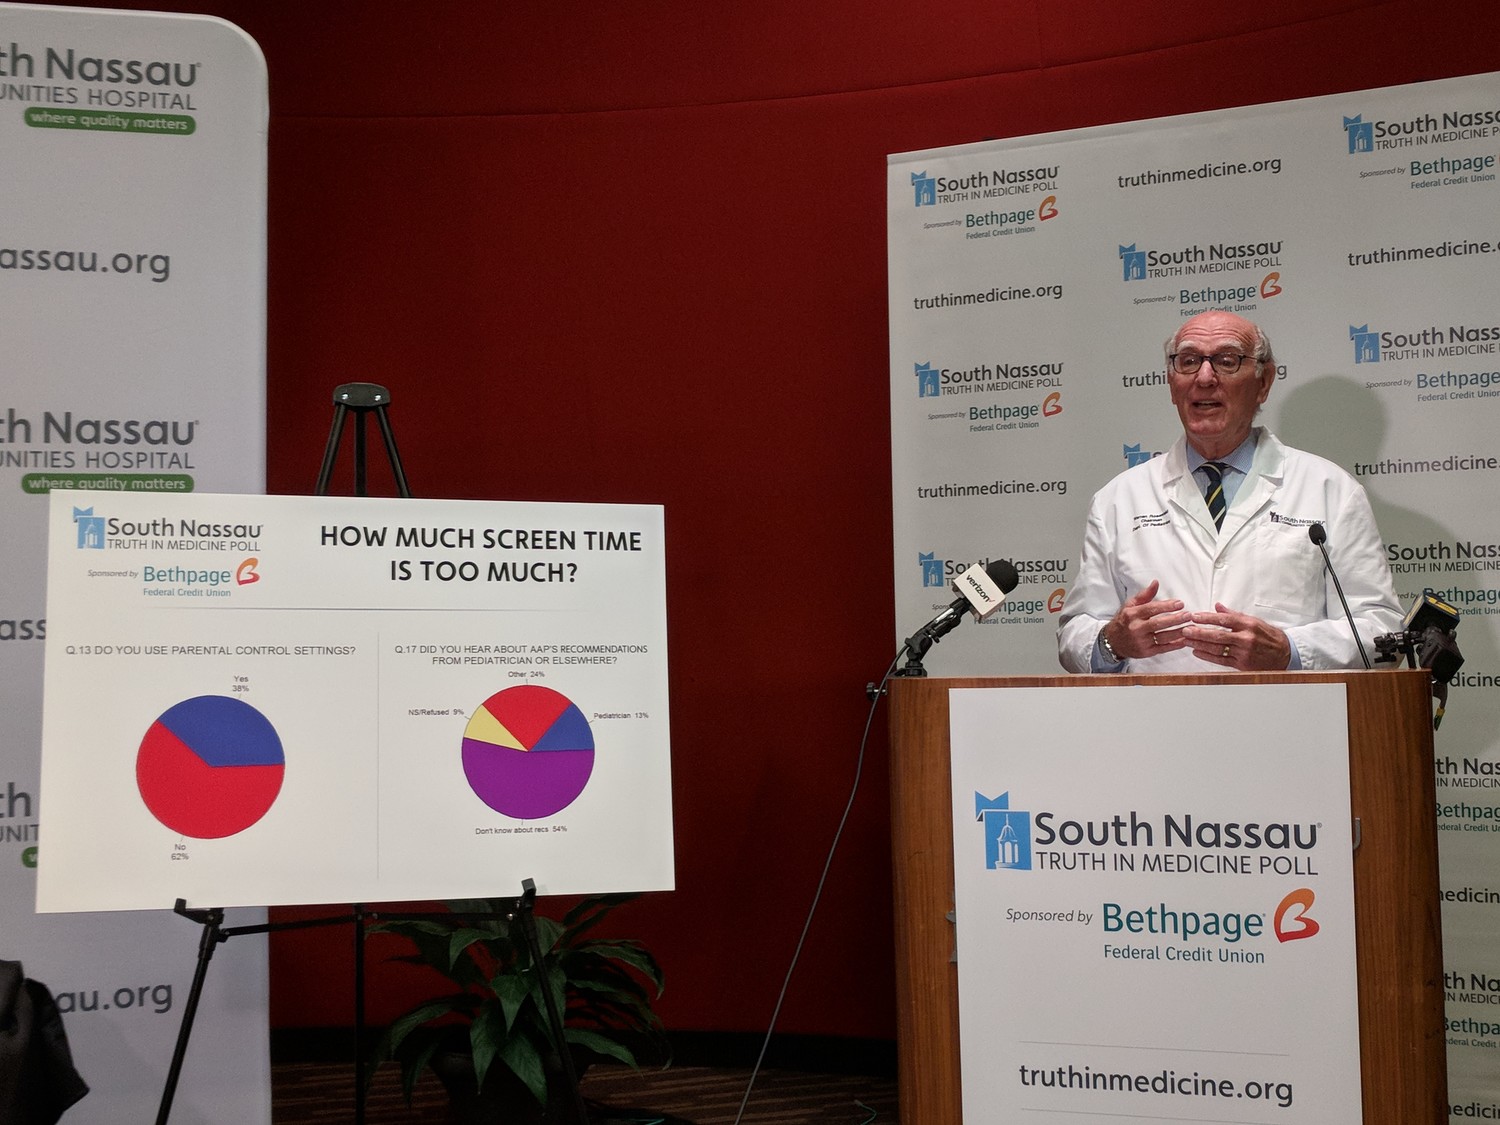 Dr. Warren Rosenfeld, chairman of pediatrics at South Nassau Communities Hospital, explained at a May 10 news conference the associations between excessive screen time among children and delays in their brain development.